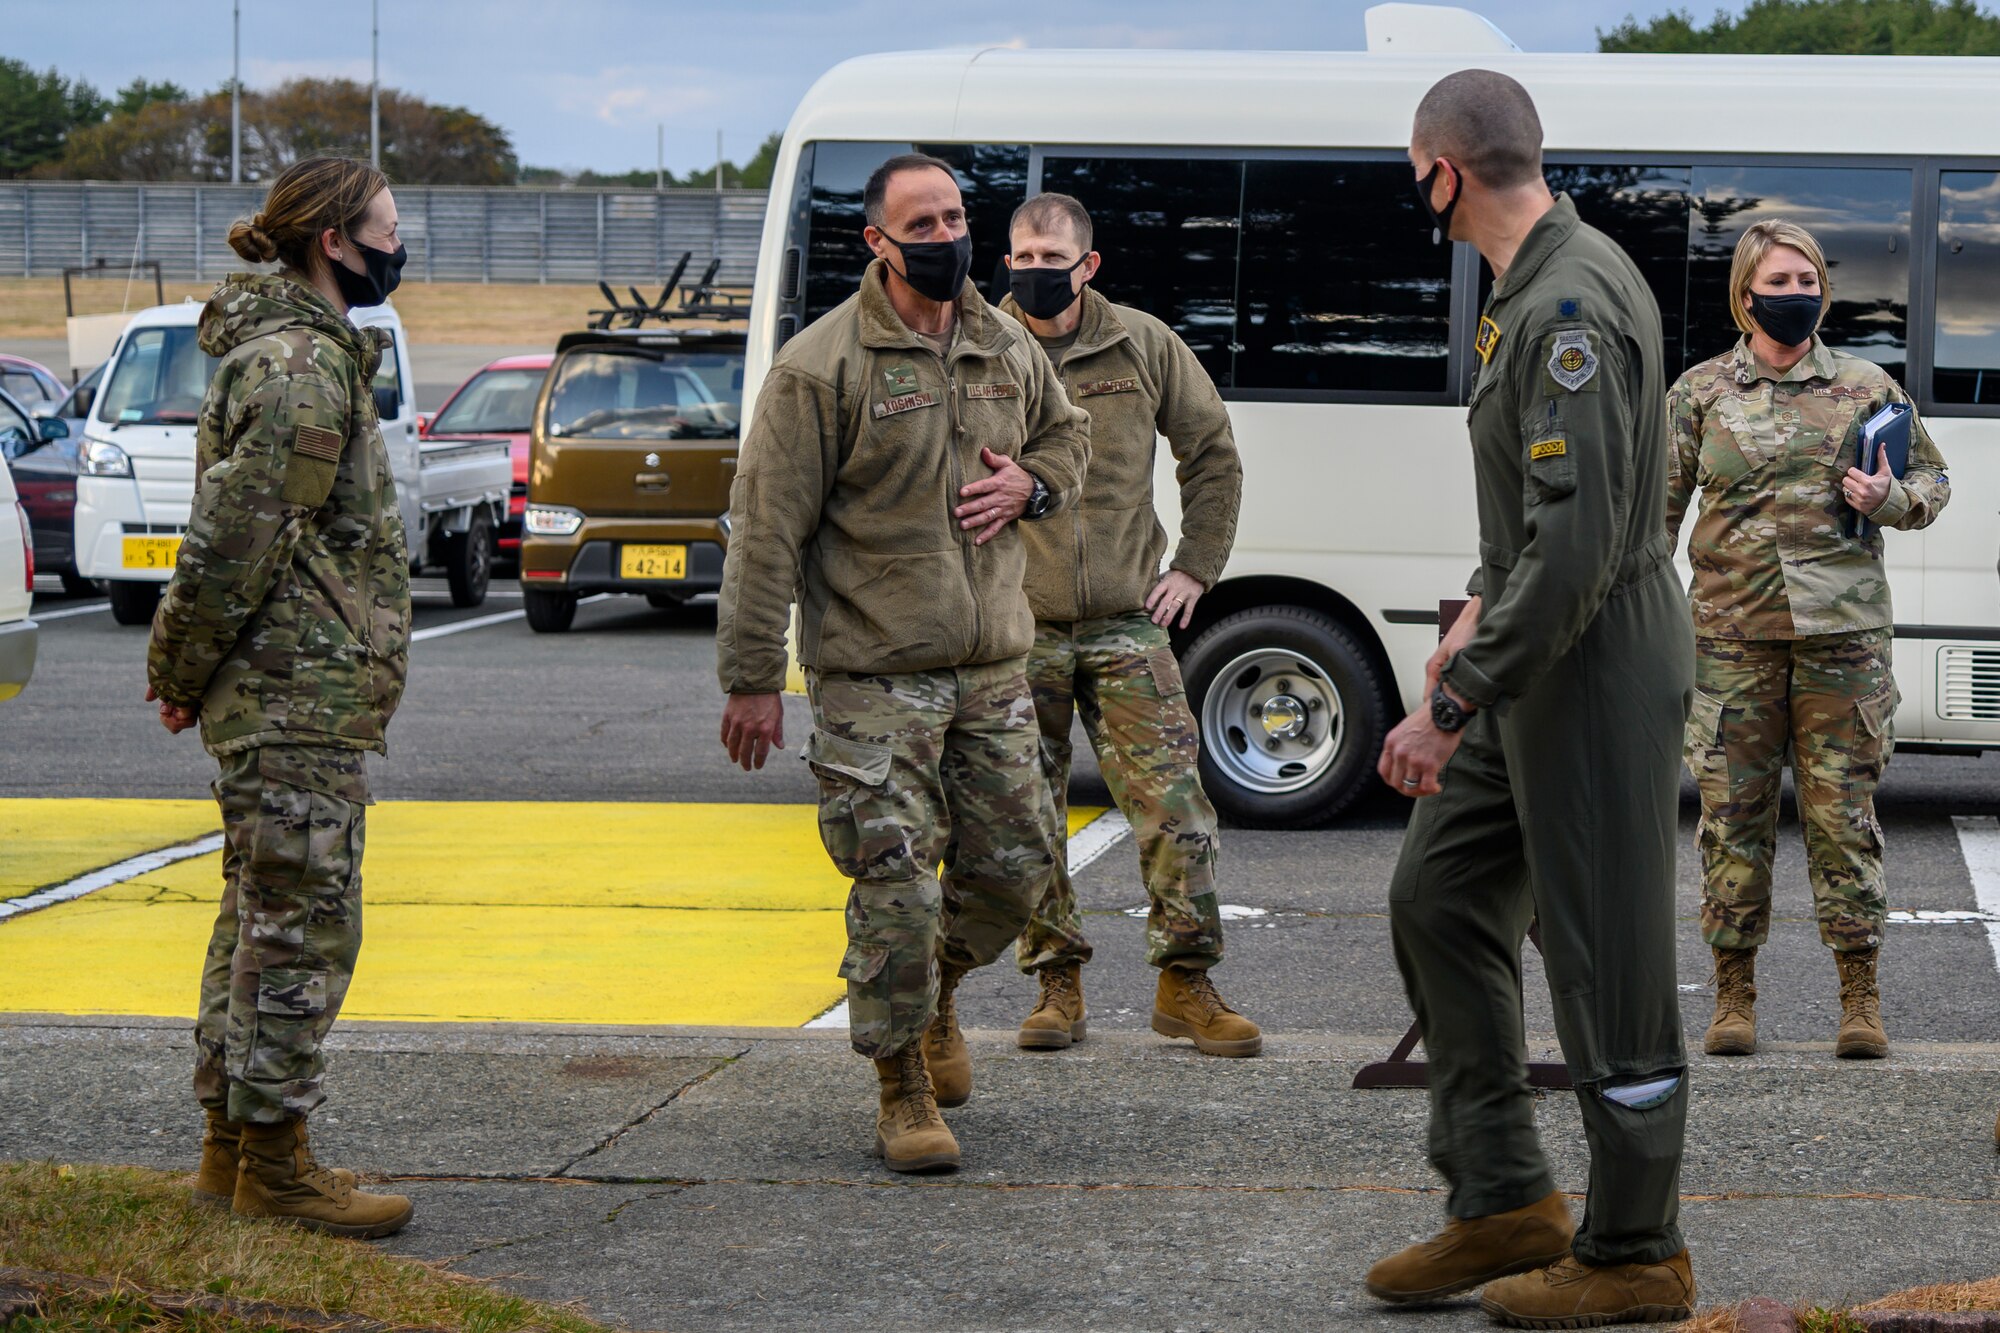 U.S. Air Force Brig. Gen. Leonard J. Kosinski, the 5th Air Force vice commander, and Chief Master Sgt. Kathleen McCool, 5th AF command chief, prepare to walk into the 14th Fighter Squadron at Misawa Air Base, Japan, Nov. 23, 2020. During their two-day visit, Kosinski and McCool received mission briefs from various 35th Fighter Wing units and agencies, had the opportunity to meet and interact with Airmen, and learn about the various roles Team Misawa members play to keep their community safe. (U.S. Air Force photo by Airman 1st Class China M. Shock)